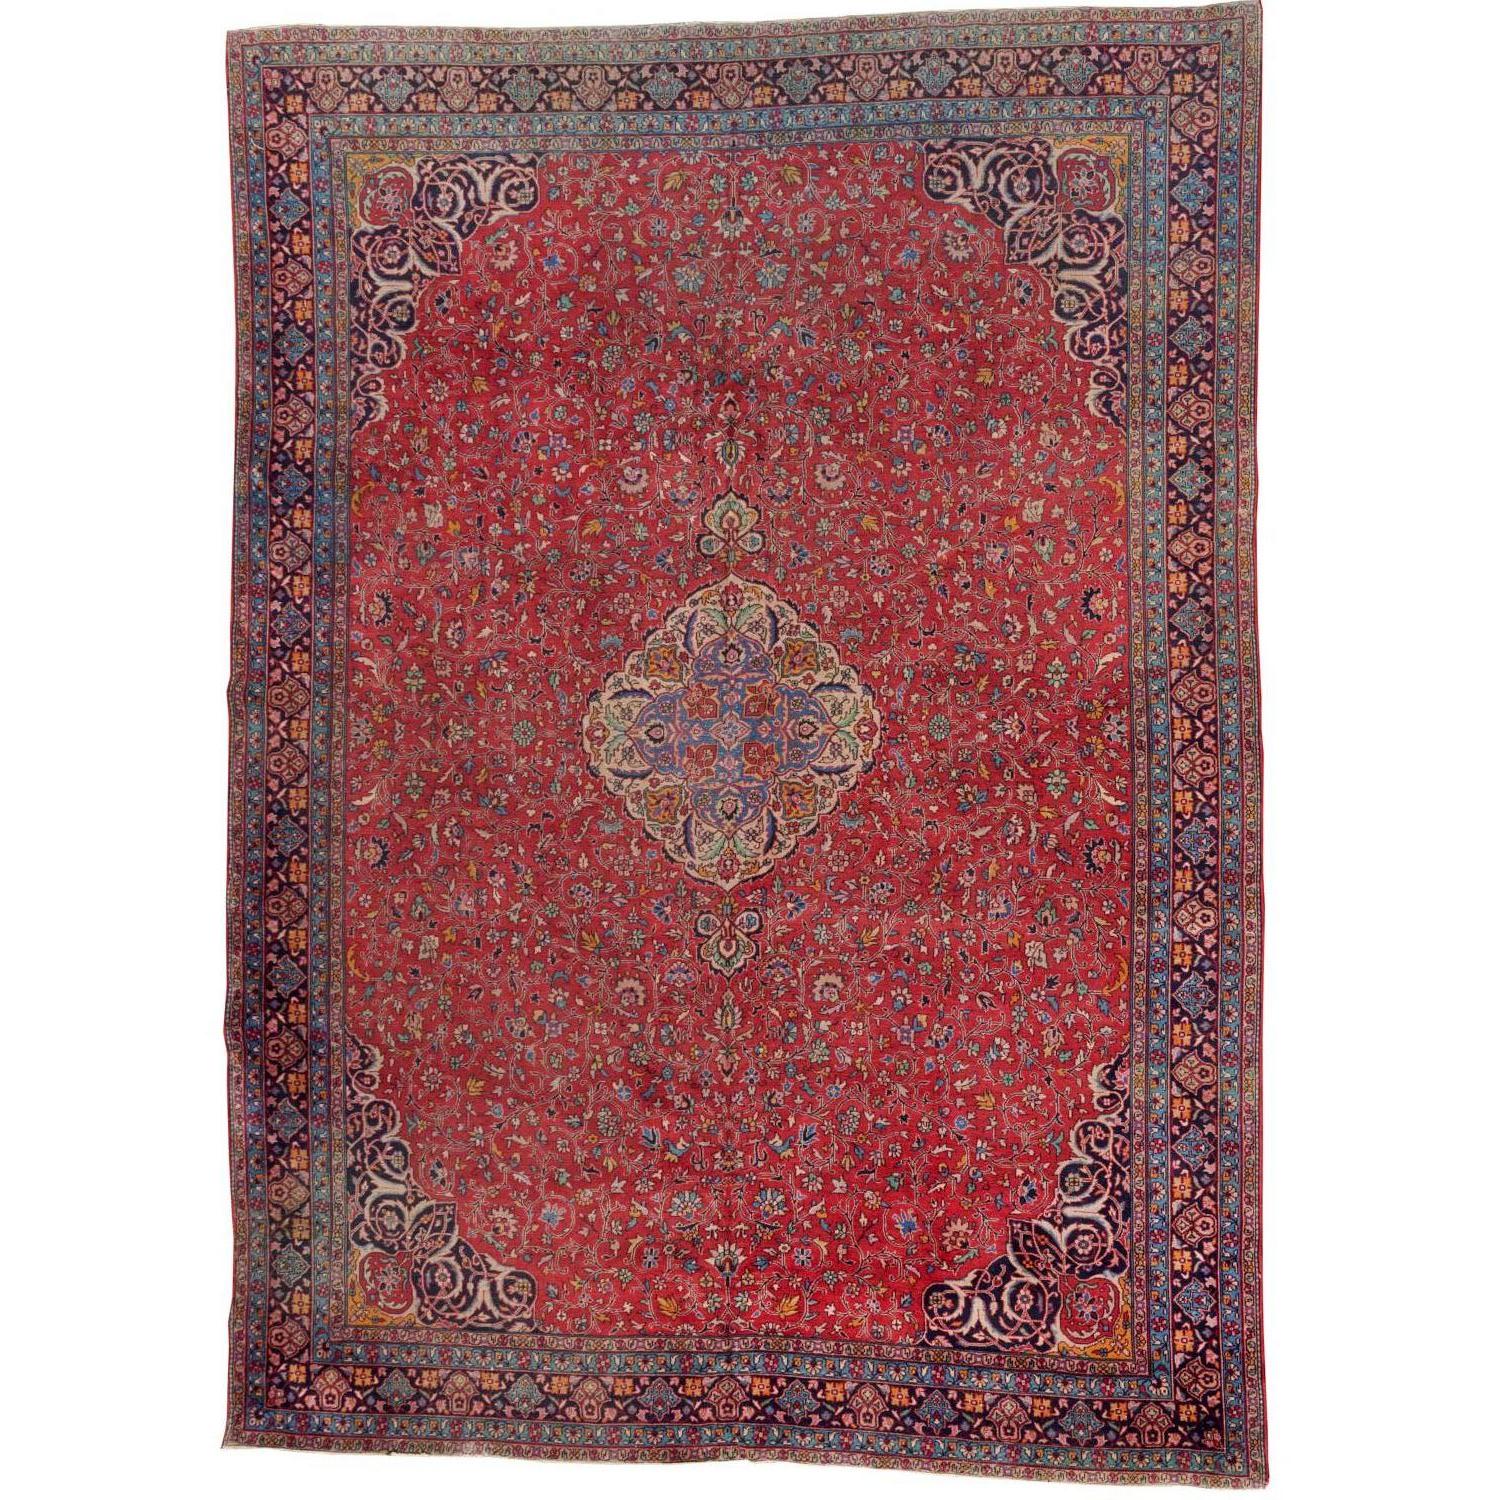 Early 20th C. Room Sized Kashan Carpet, Scrolling Floral Vines on a Red Ground For Sale 4